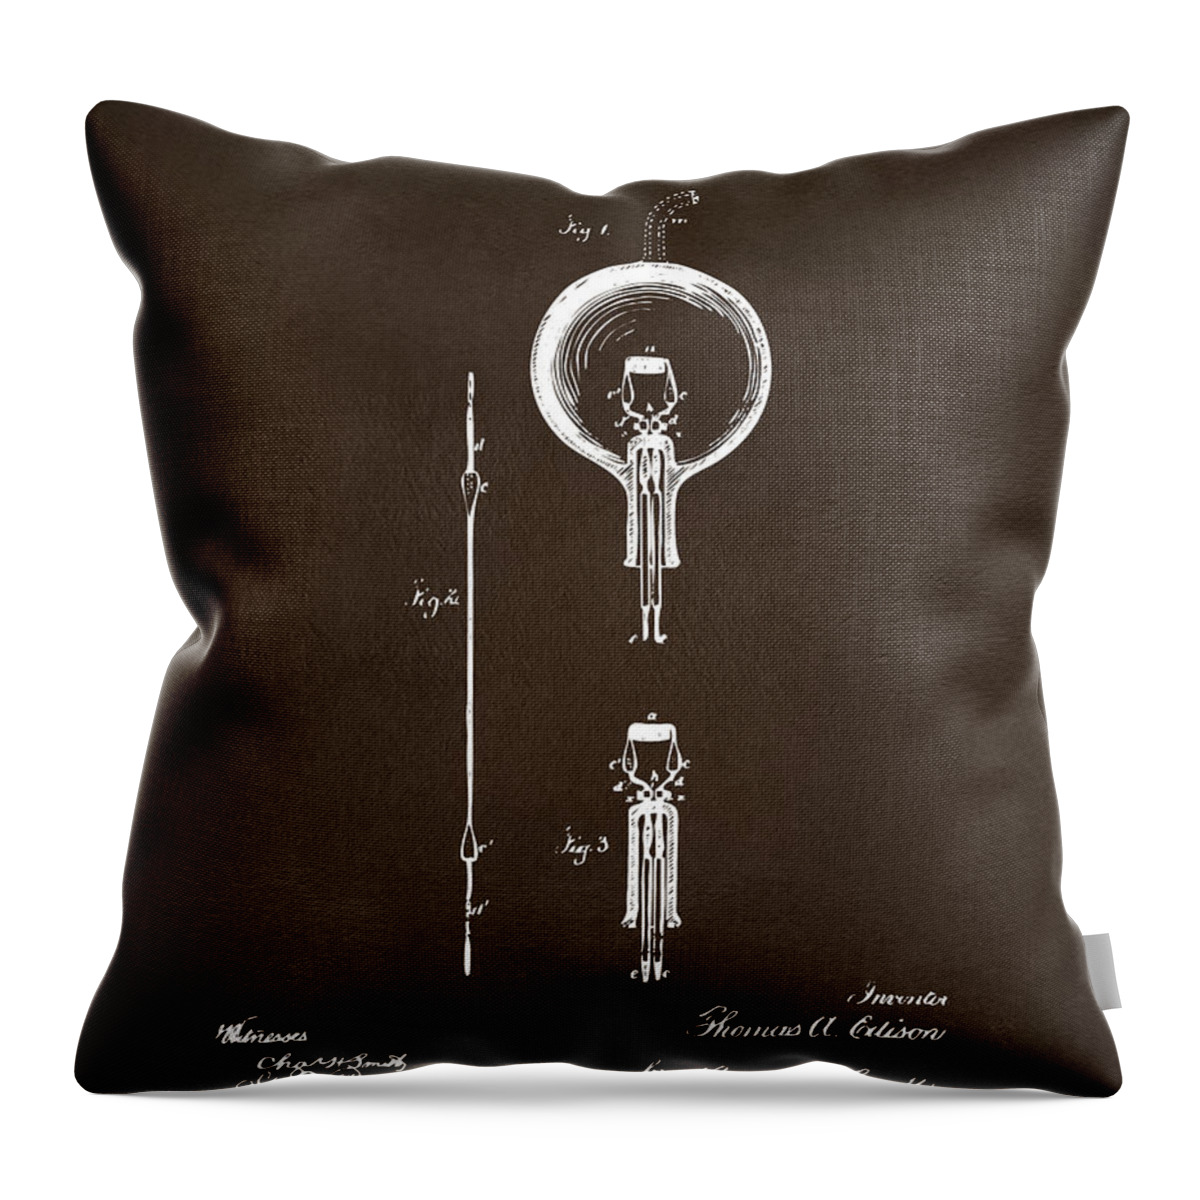 Edison Throw Pillow featuring the digital art 1880 Edison Electric Lamp Patent Artwork Espresso by Nikki Marie Smith